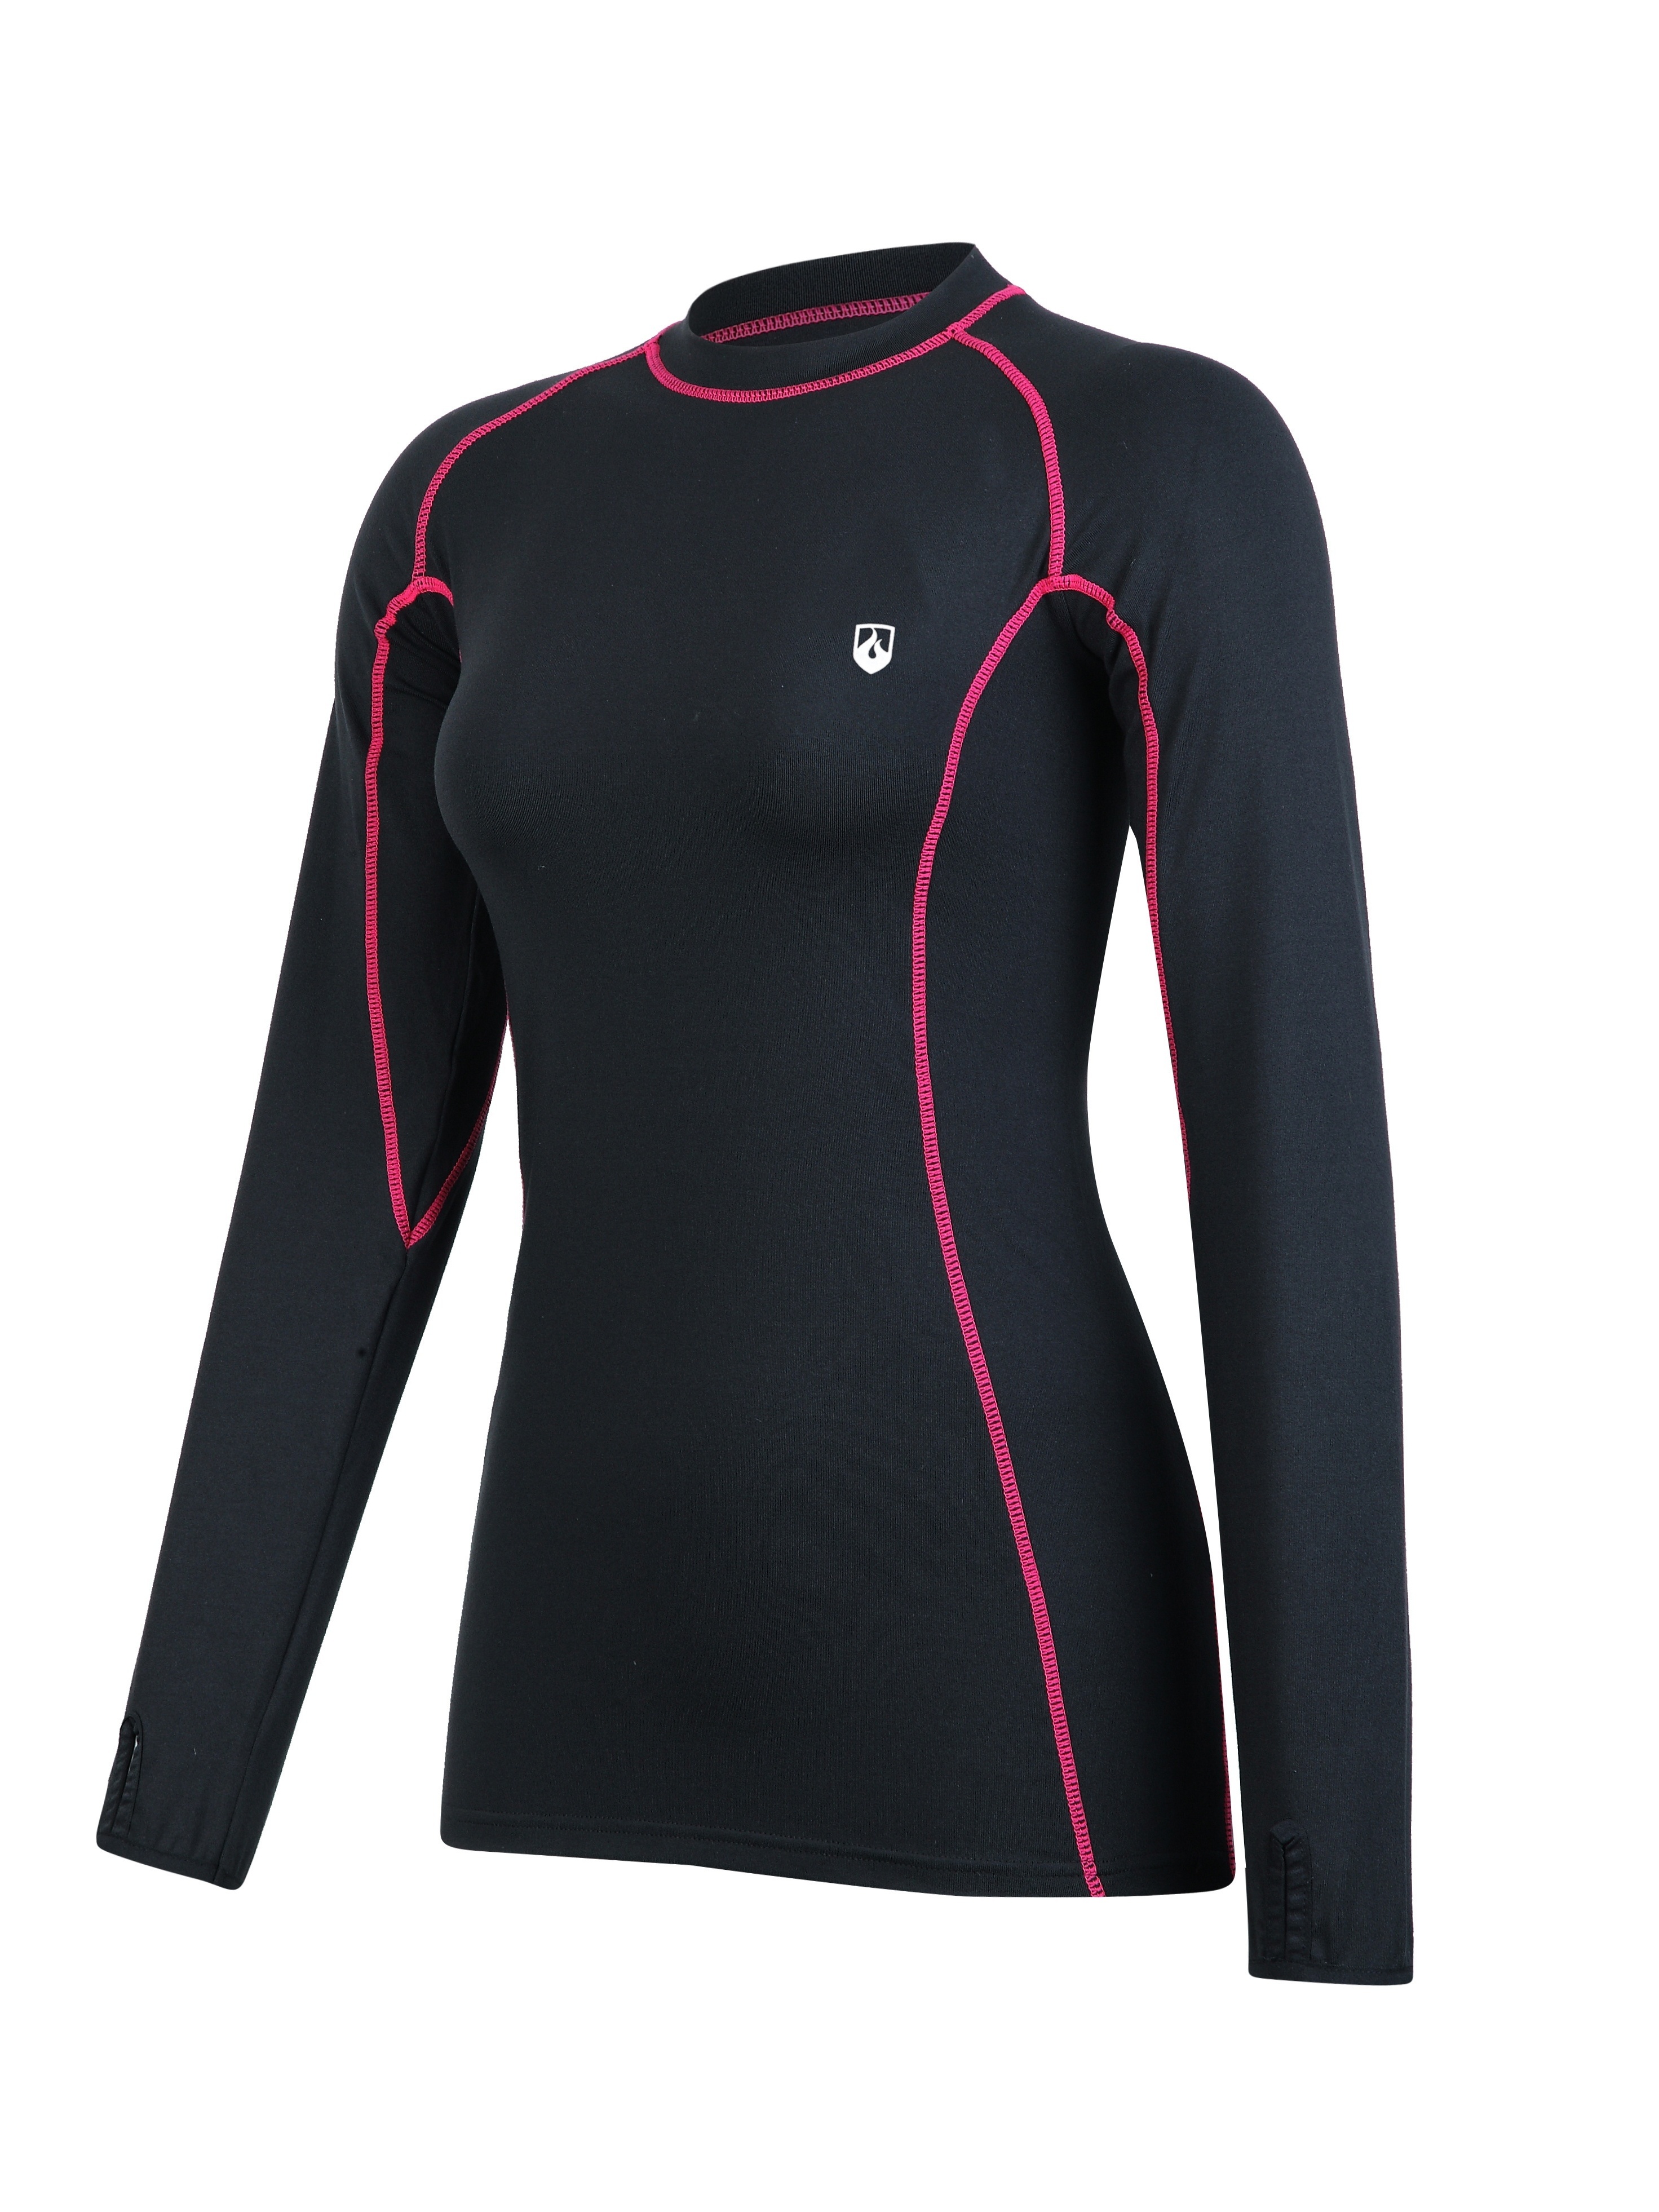 Womens T-Shirt Long Sleeve Undershirts Compression Tops Thermal